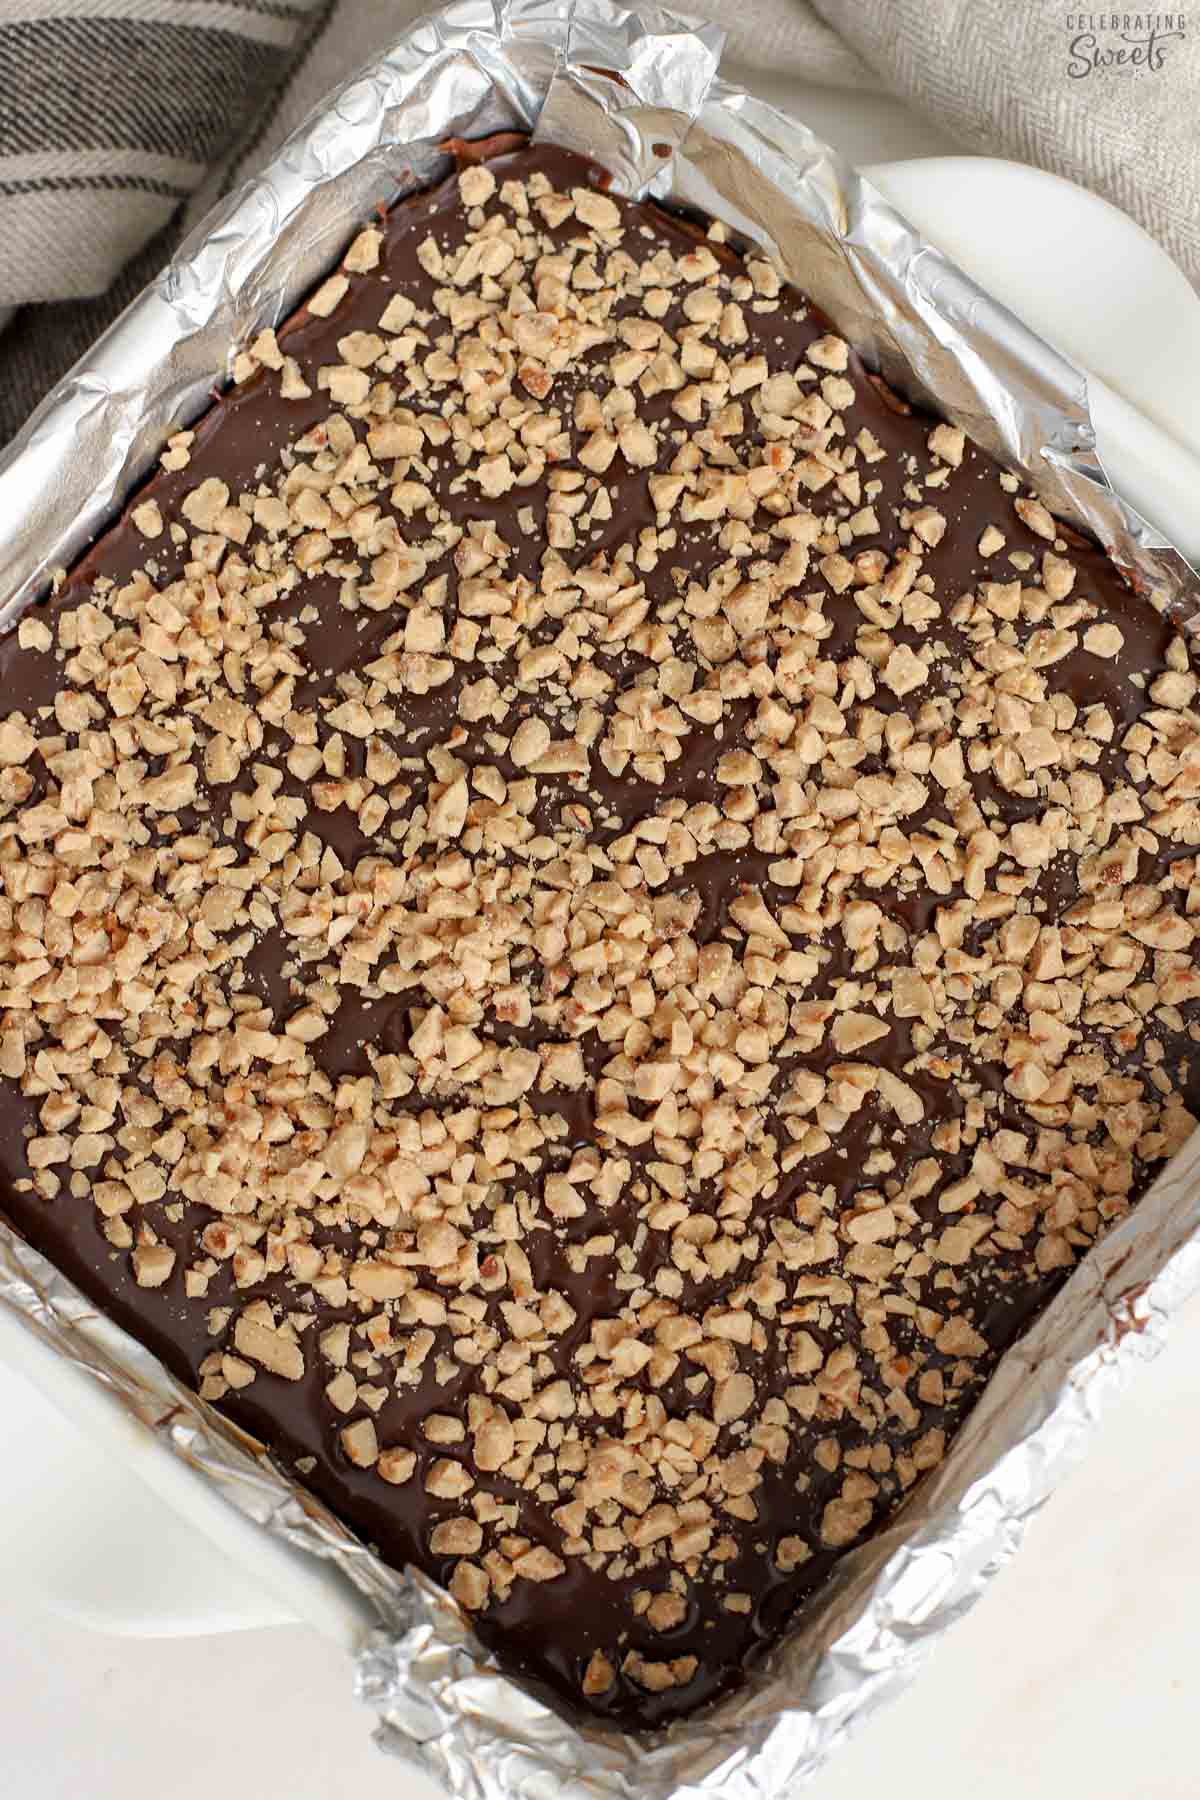 Brownies topped with toffee bits in a foil-lined square pan.